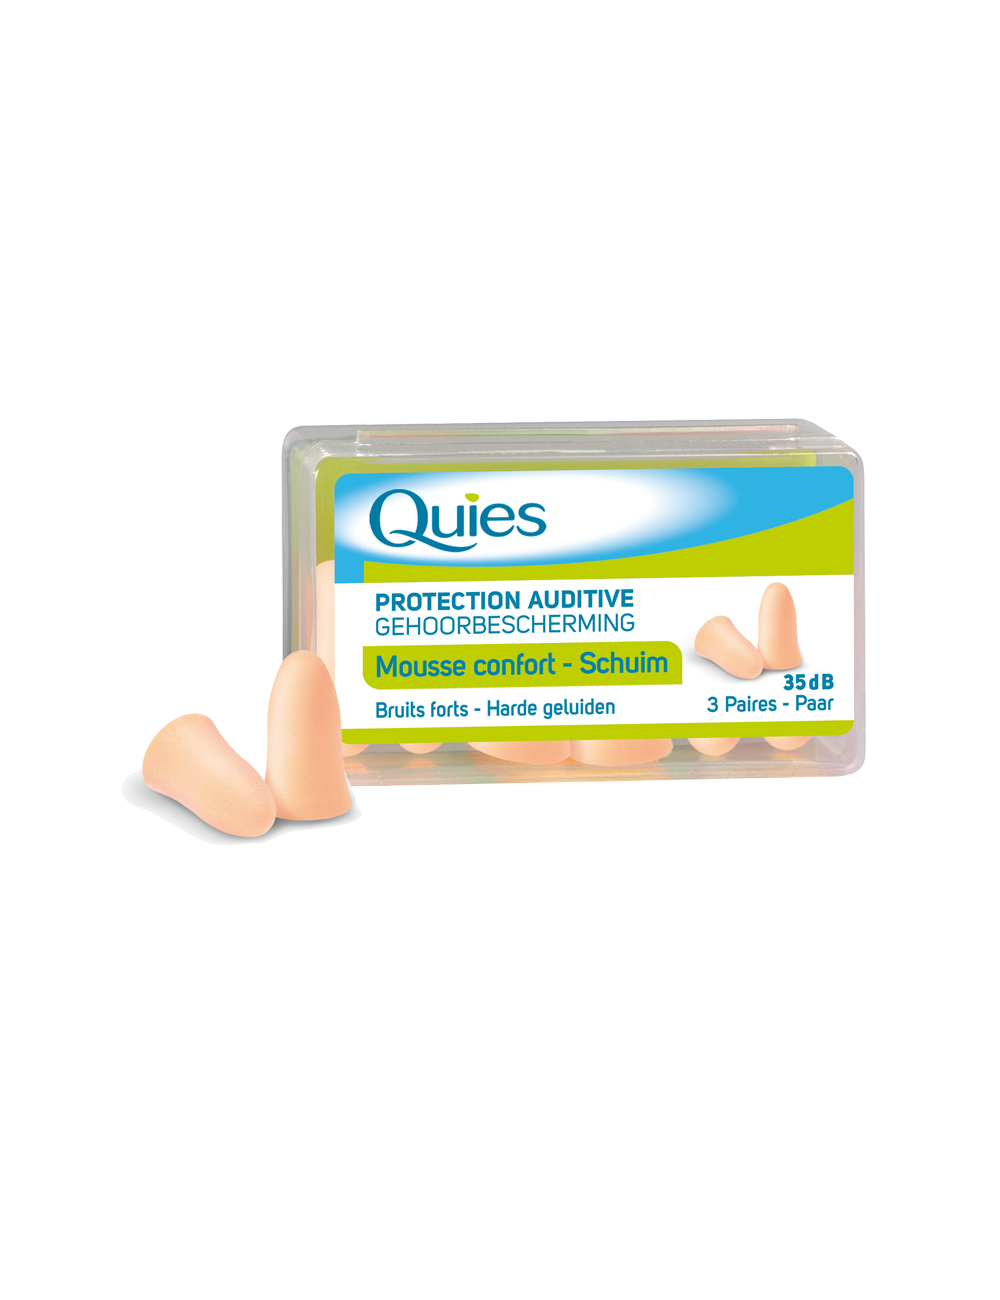 QUIES PROTECTION AUDITIVE SILICONE ADULTE B3 PAIRES